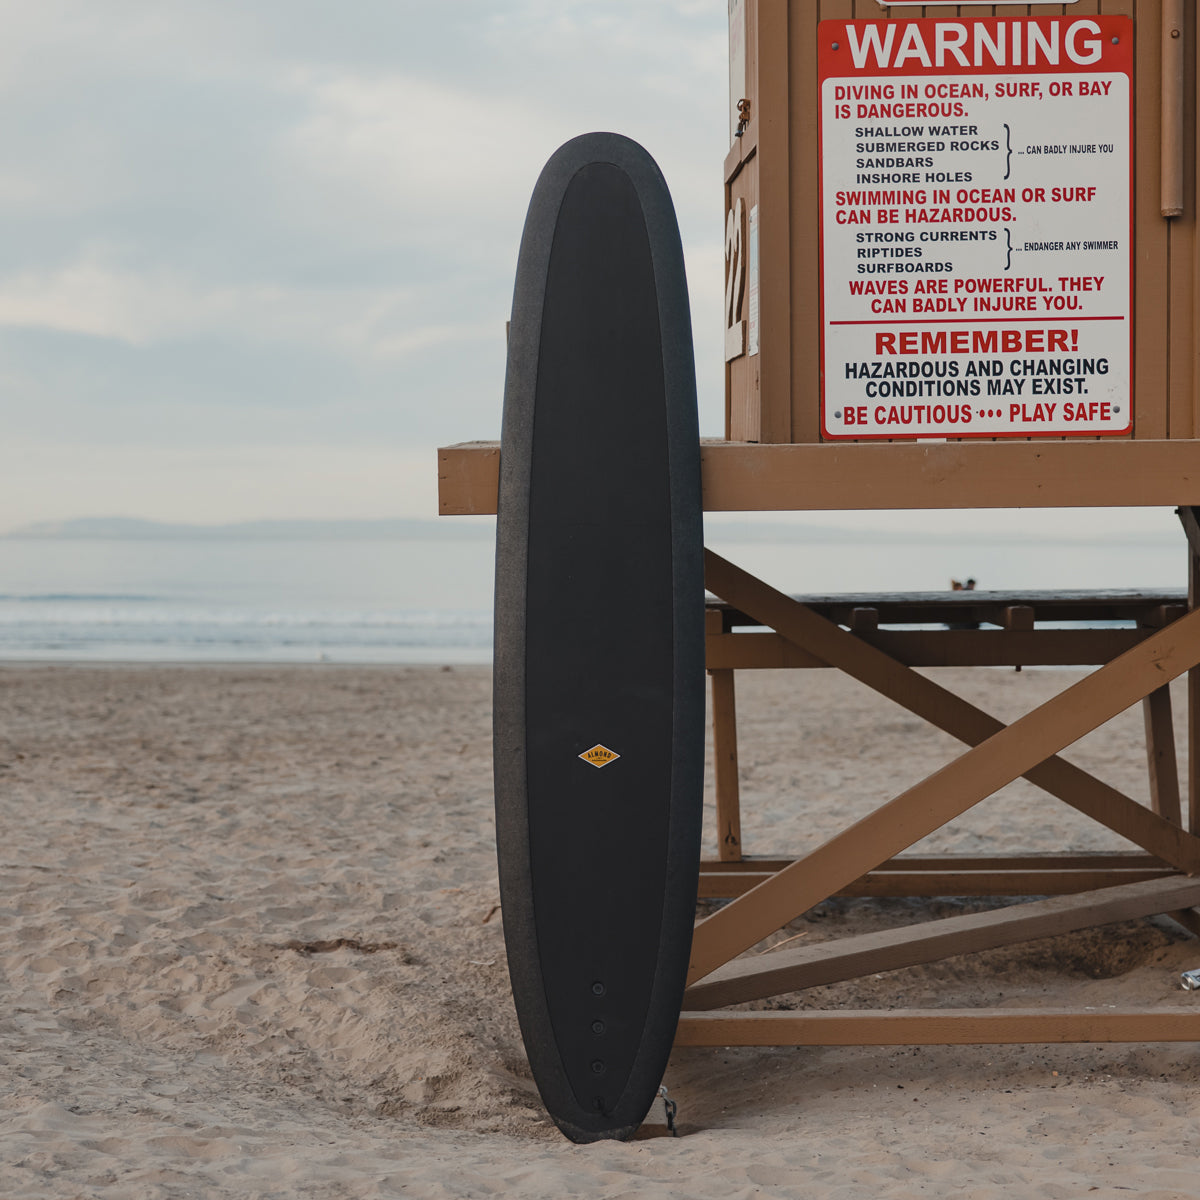 A black 9 foot 2 inch Almond Surf Thump surfboard leaning up against a lifeguard tower on a beach